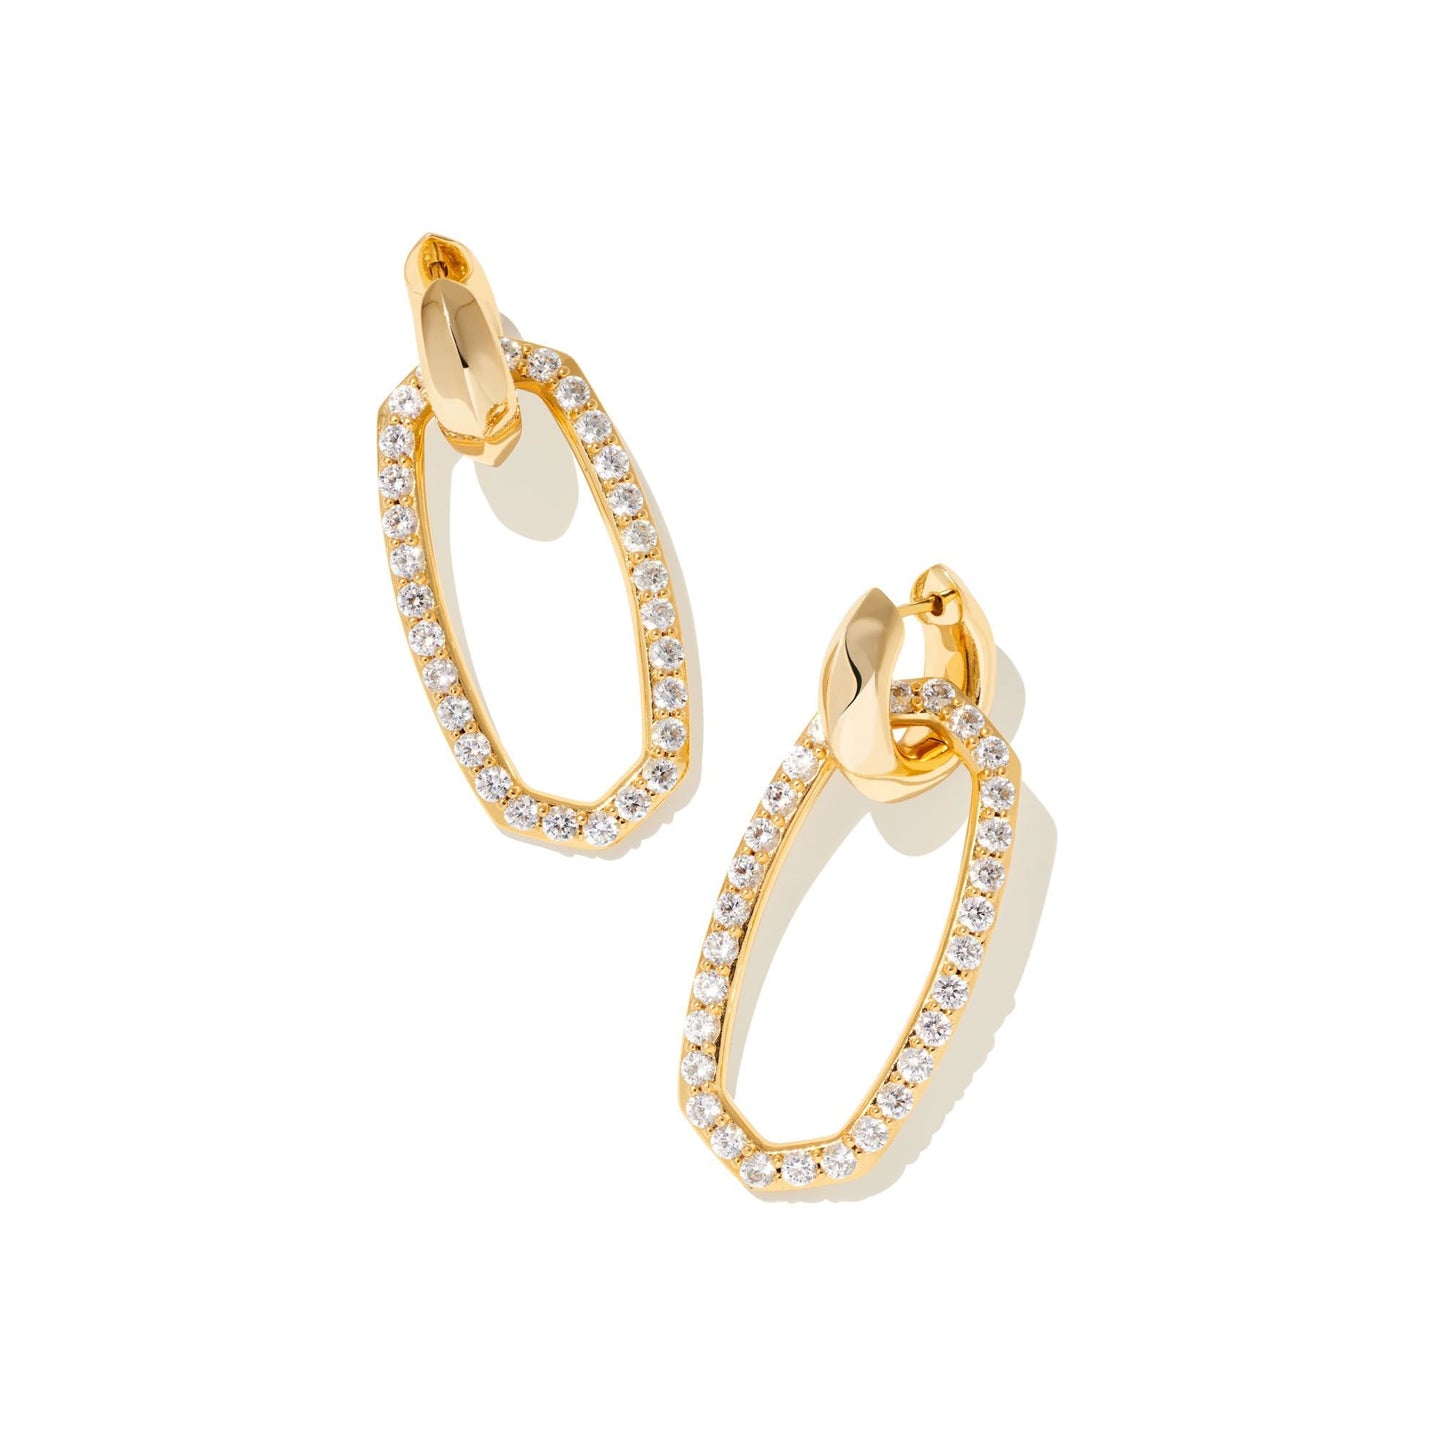 Danielle Link Earring in Gold and White Crystal